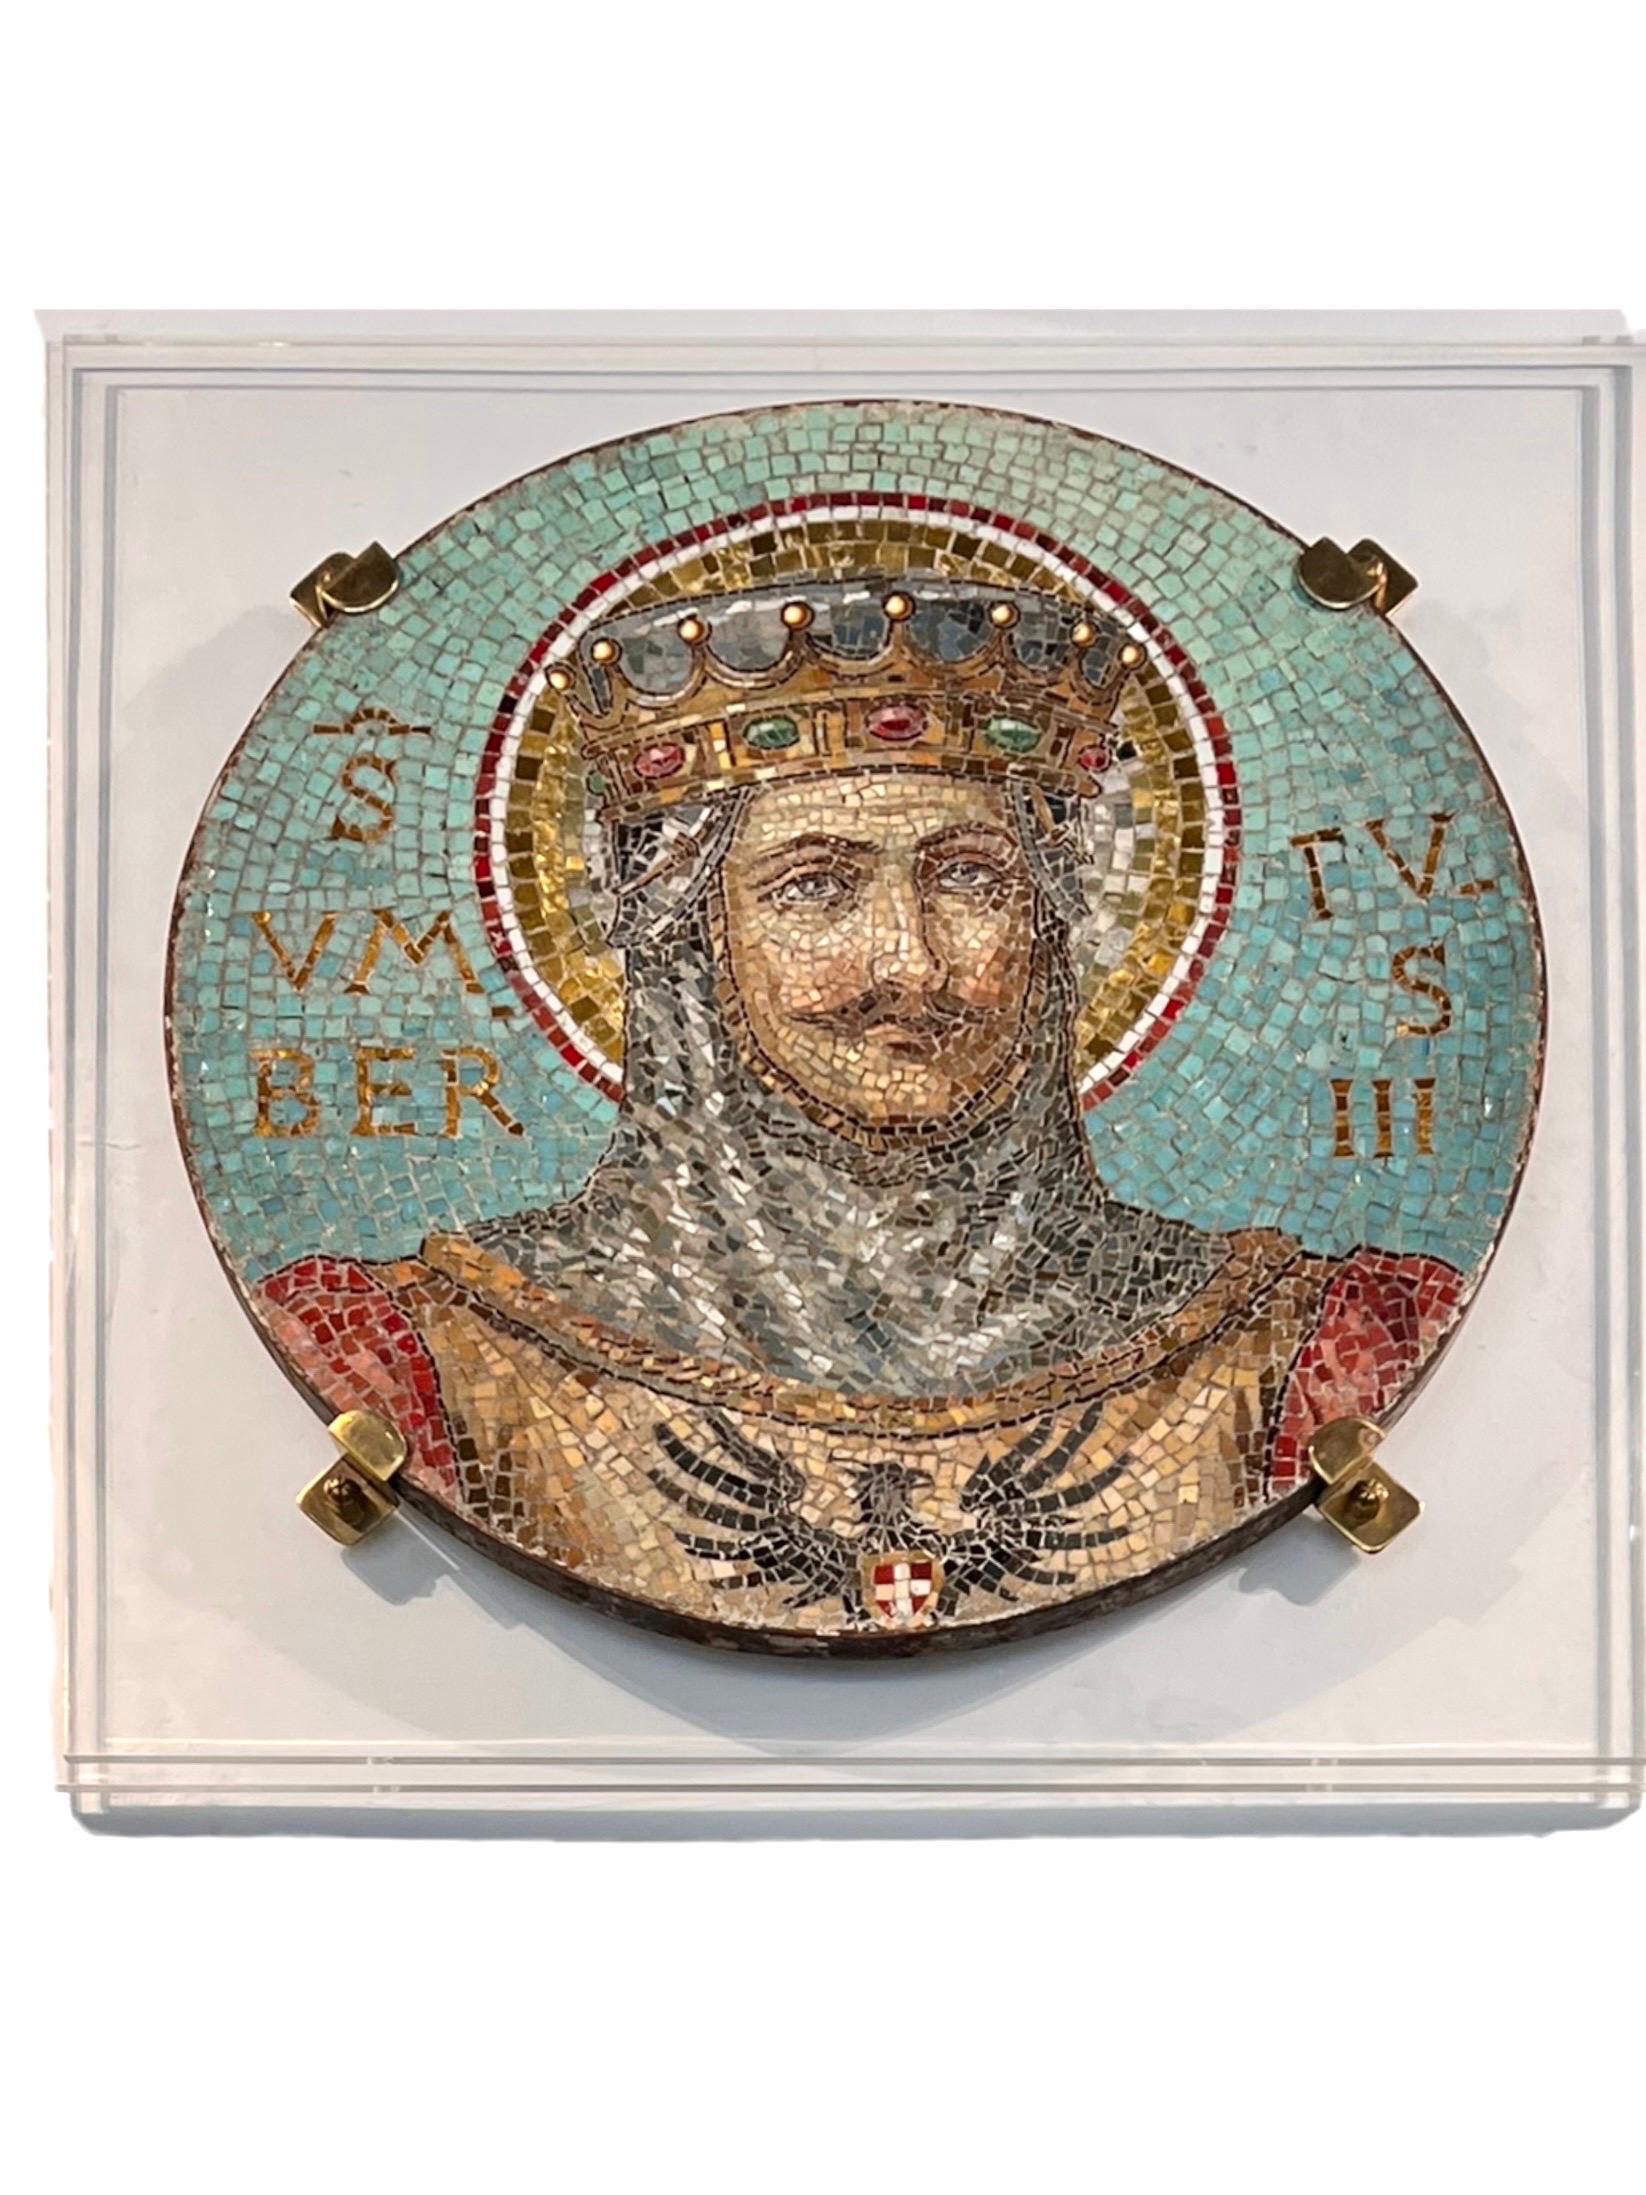 19th Century Venetian Italian round mosaic of Umberto III. The very colorful and detailed piece is mounted on Lucite panel. Umberto III (1136-1188), known as 